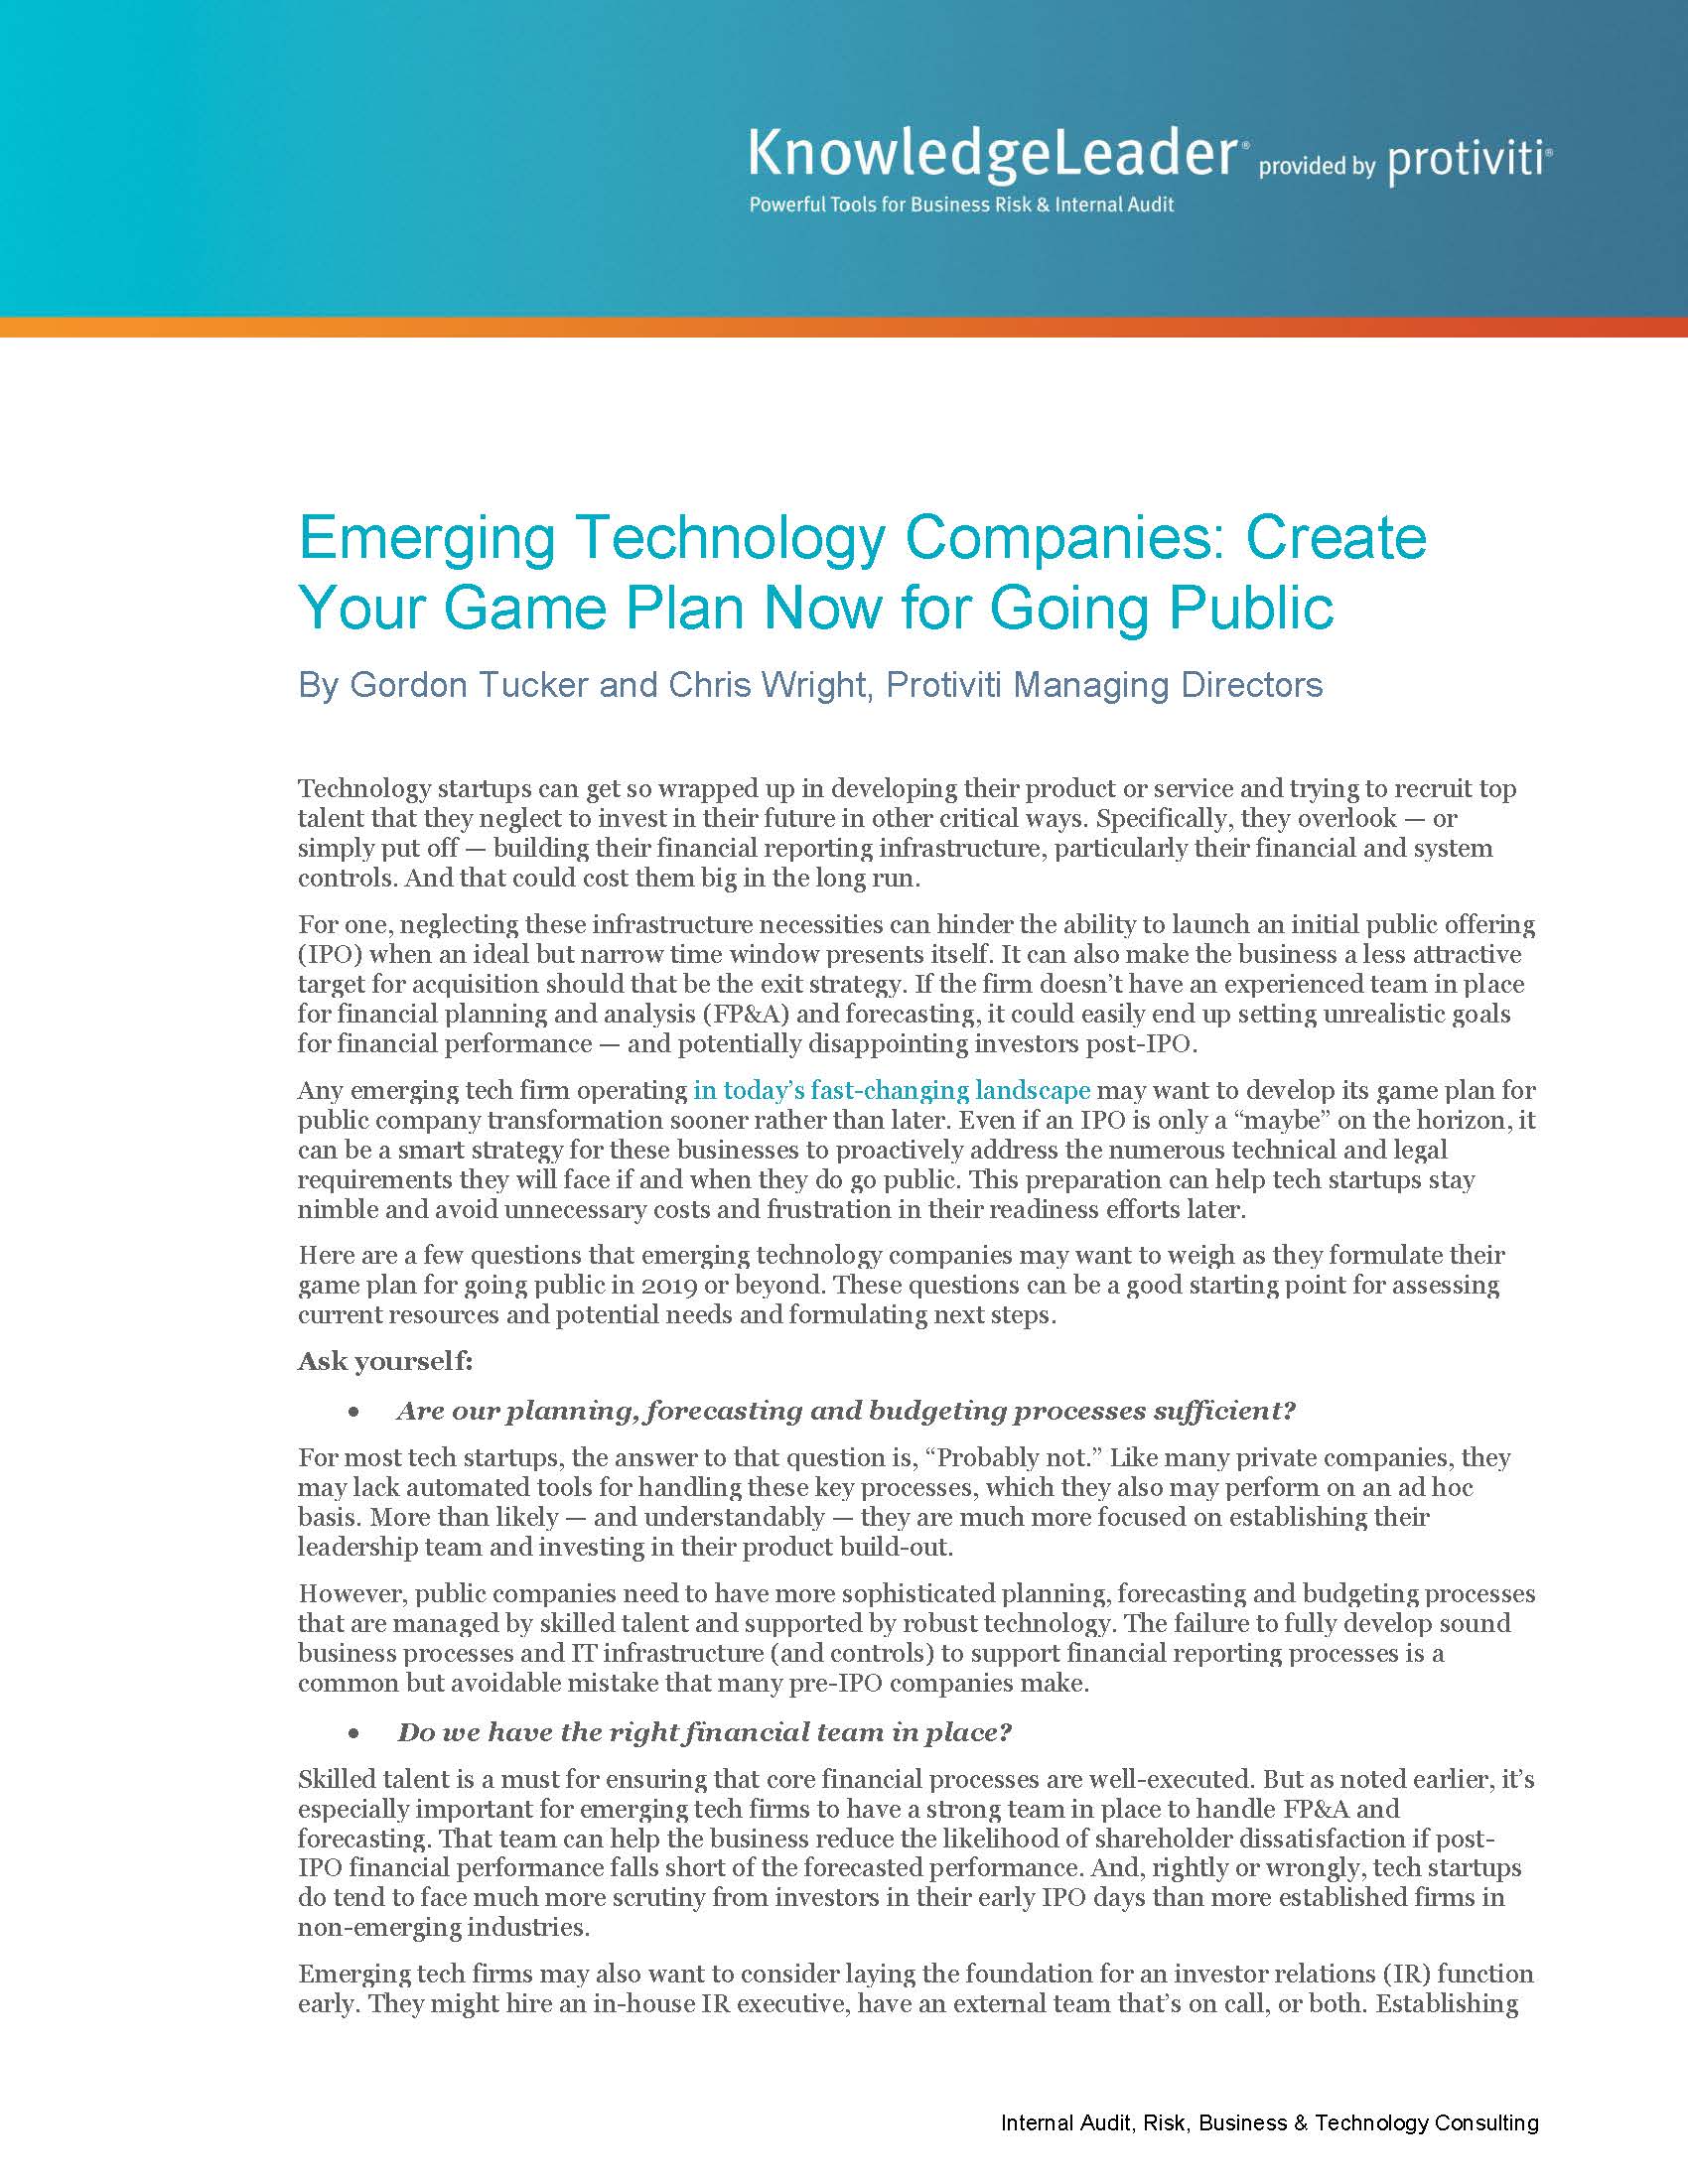 Screenshot of the first page of the Emerging Technology Companies Create Your Game Plan Now for Going Public